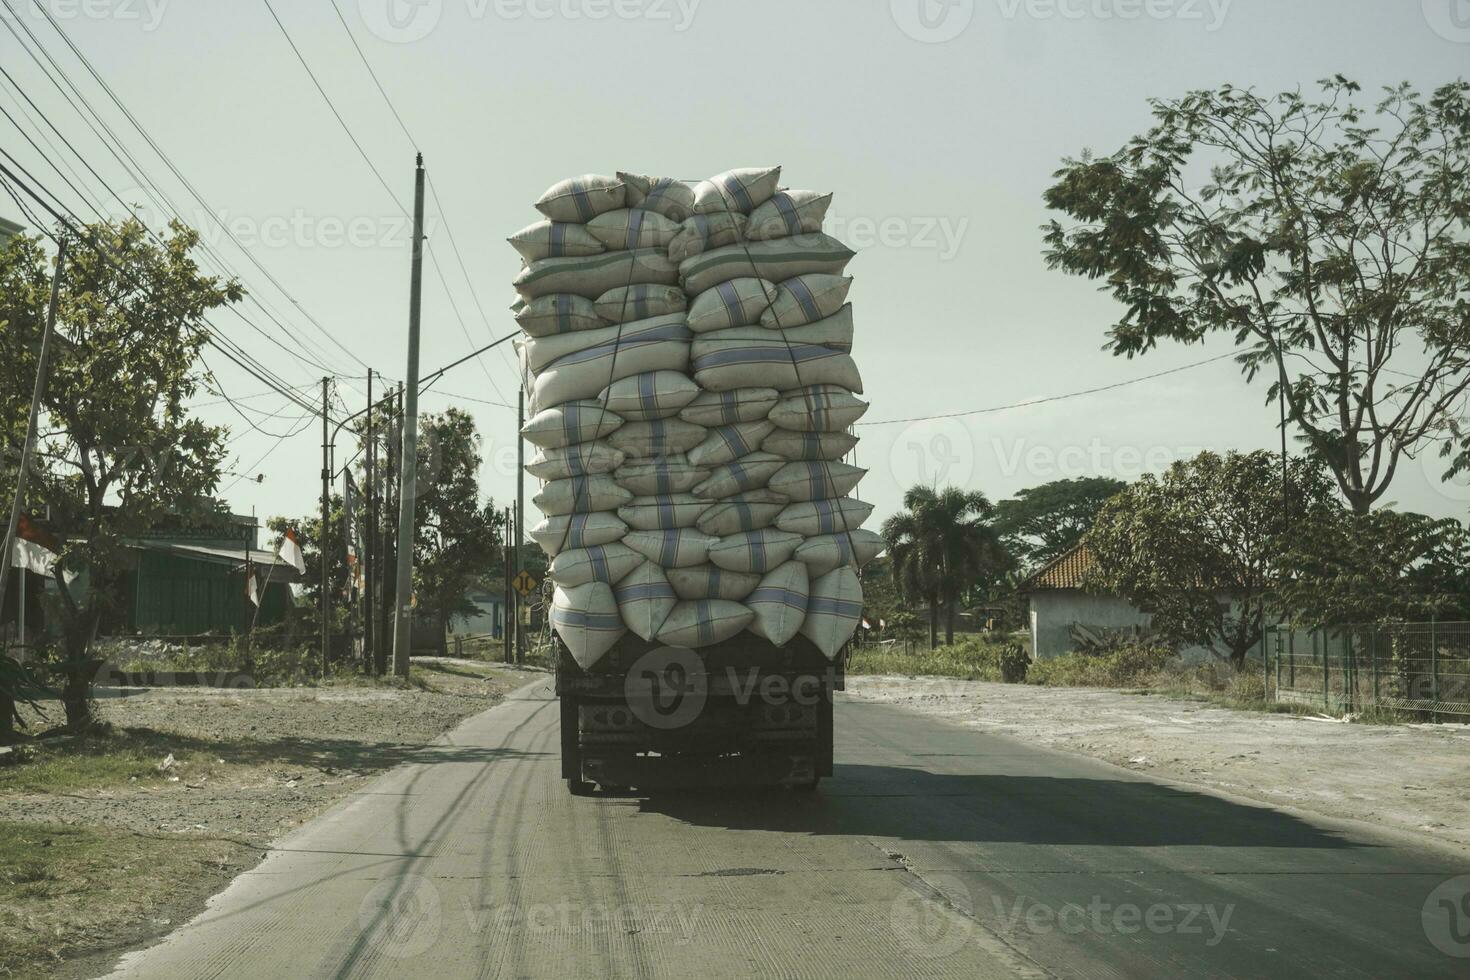 A photo of an overloaded truck on road in Jepara